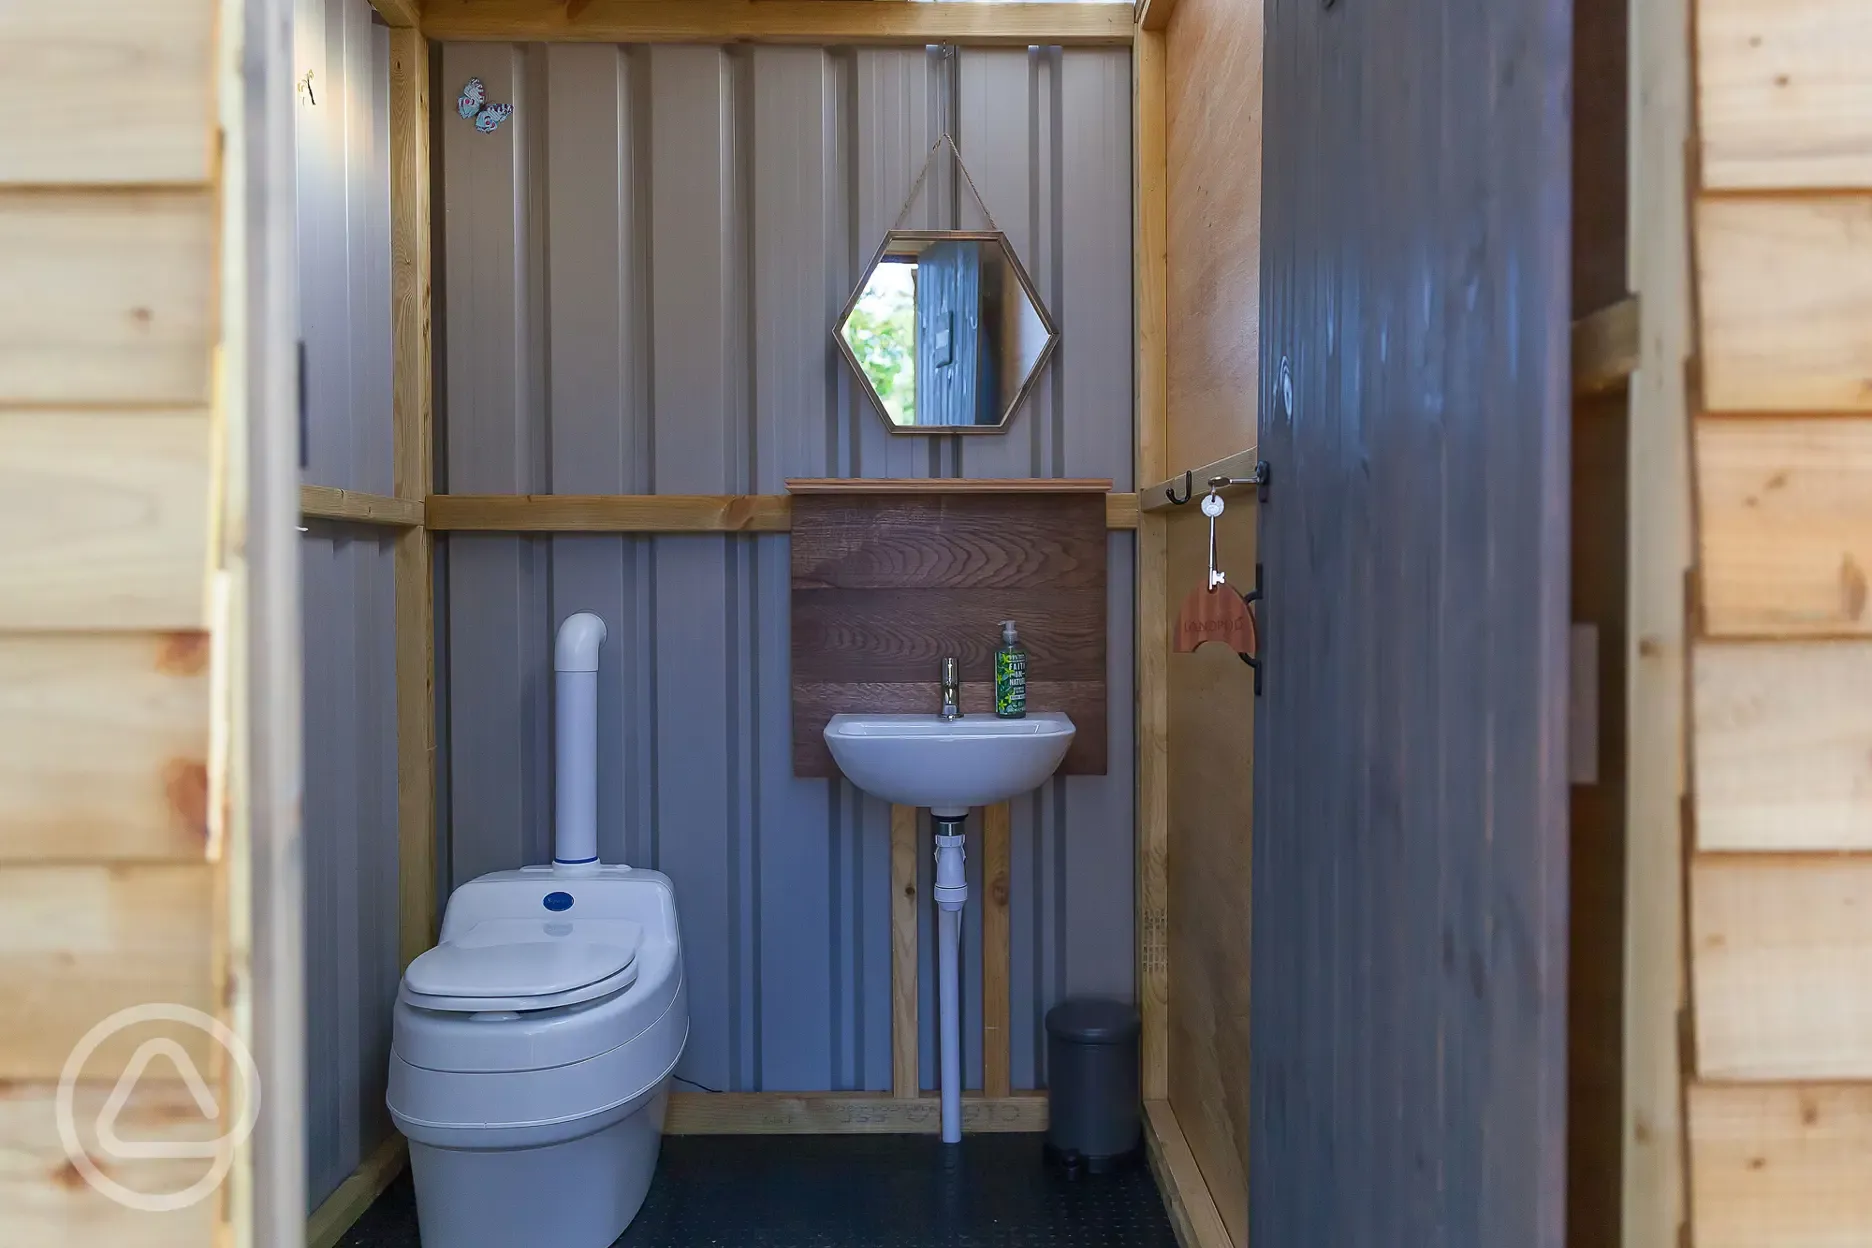 Private eco loos